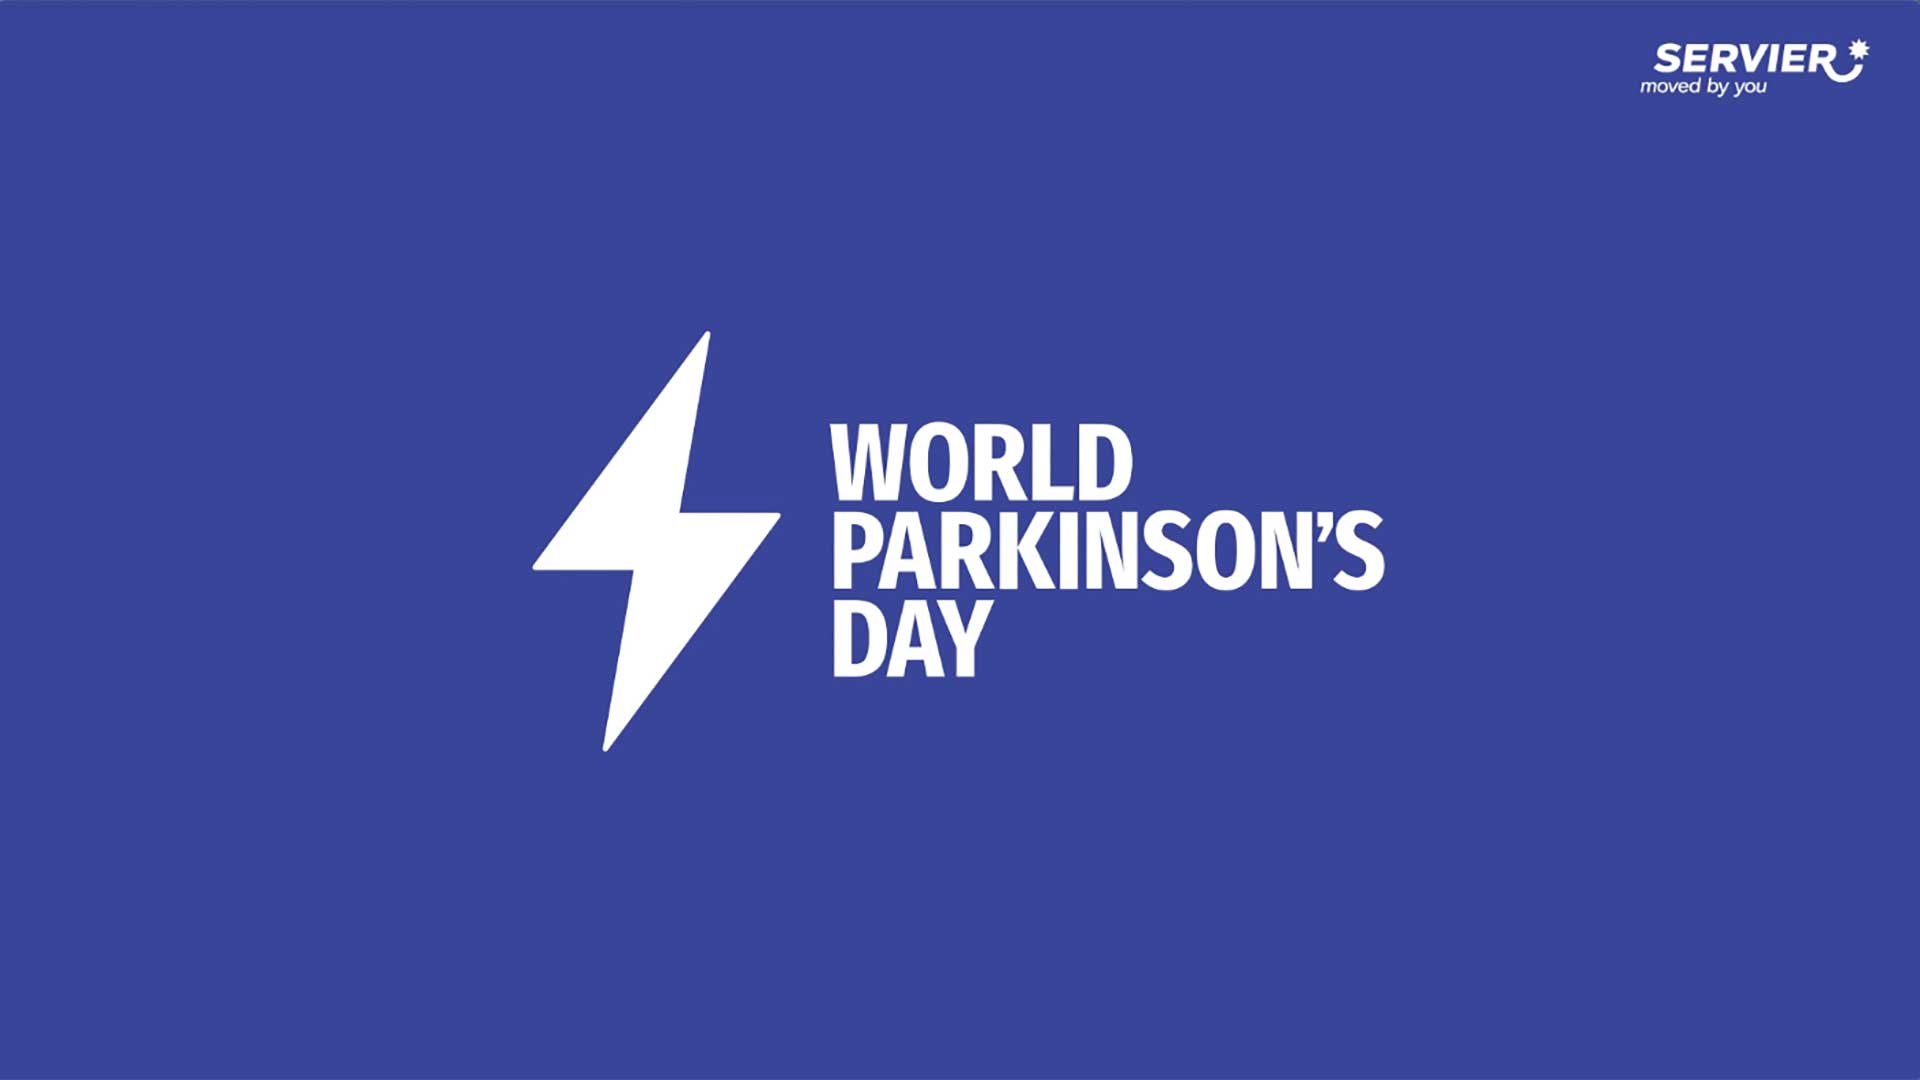 Video of the World Parkinson's Day